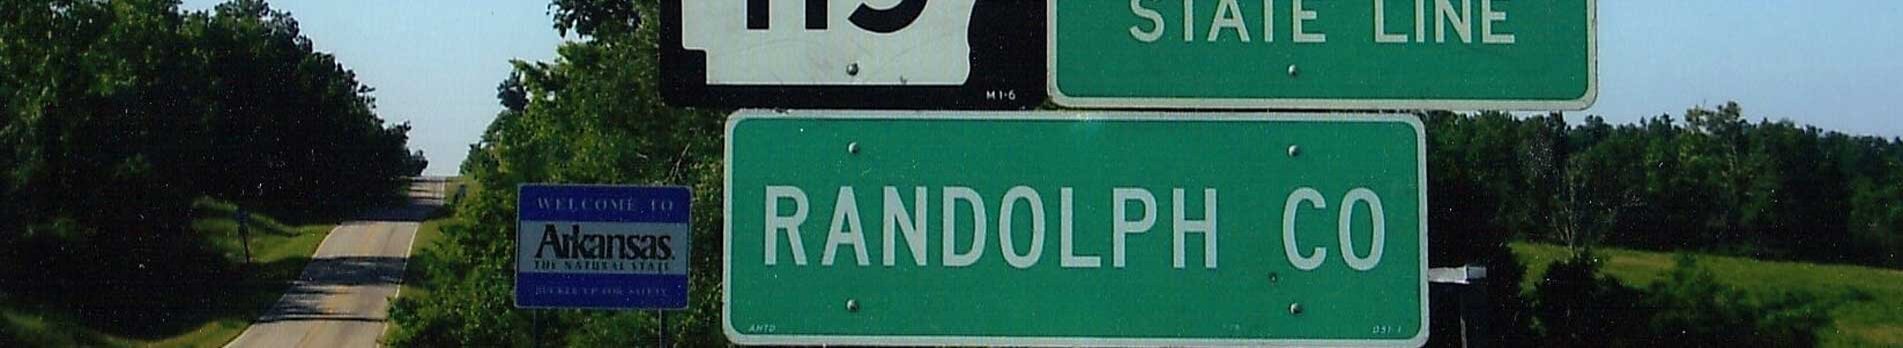 AR Highway signs showing Randolph Co and AR state line